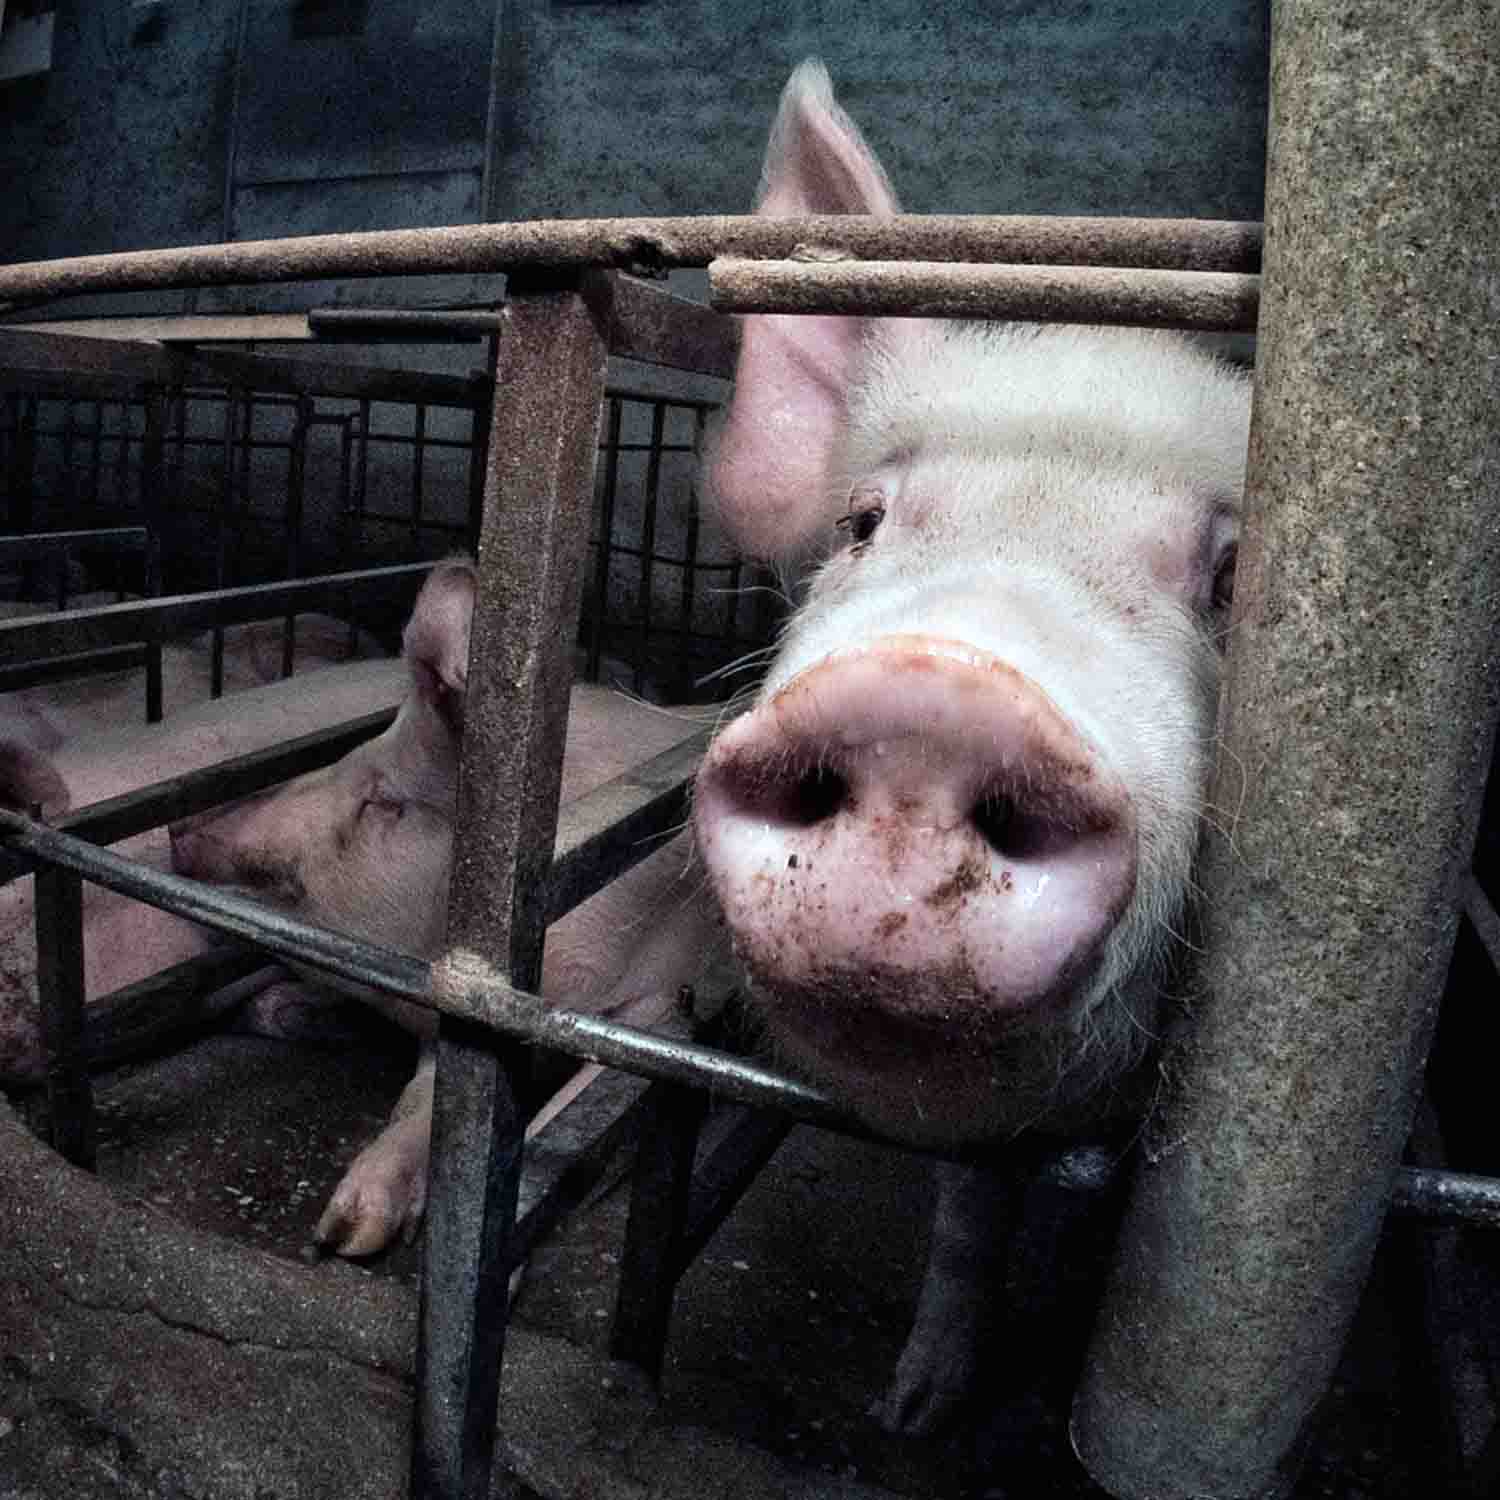 Pig inside a gestation crate looking at the camera